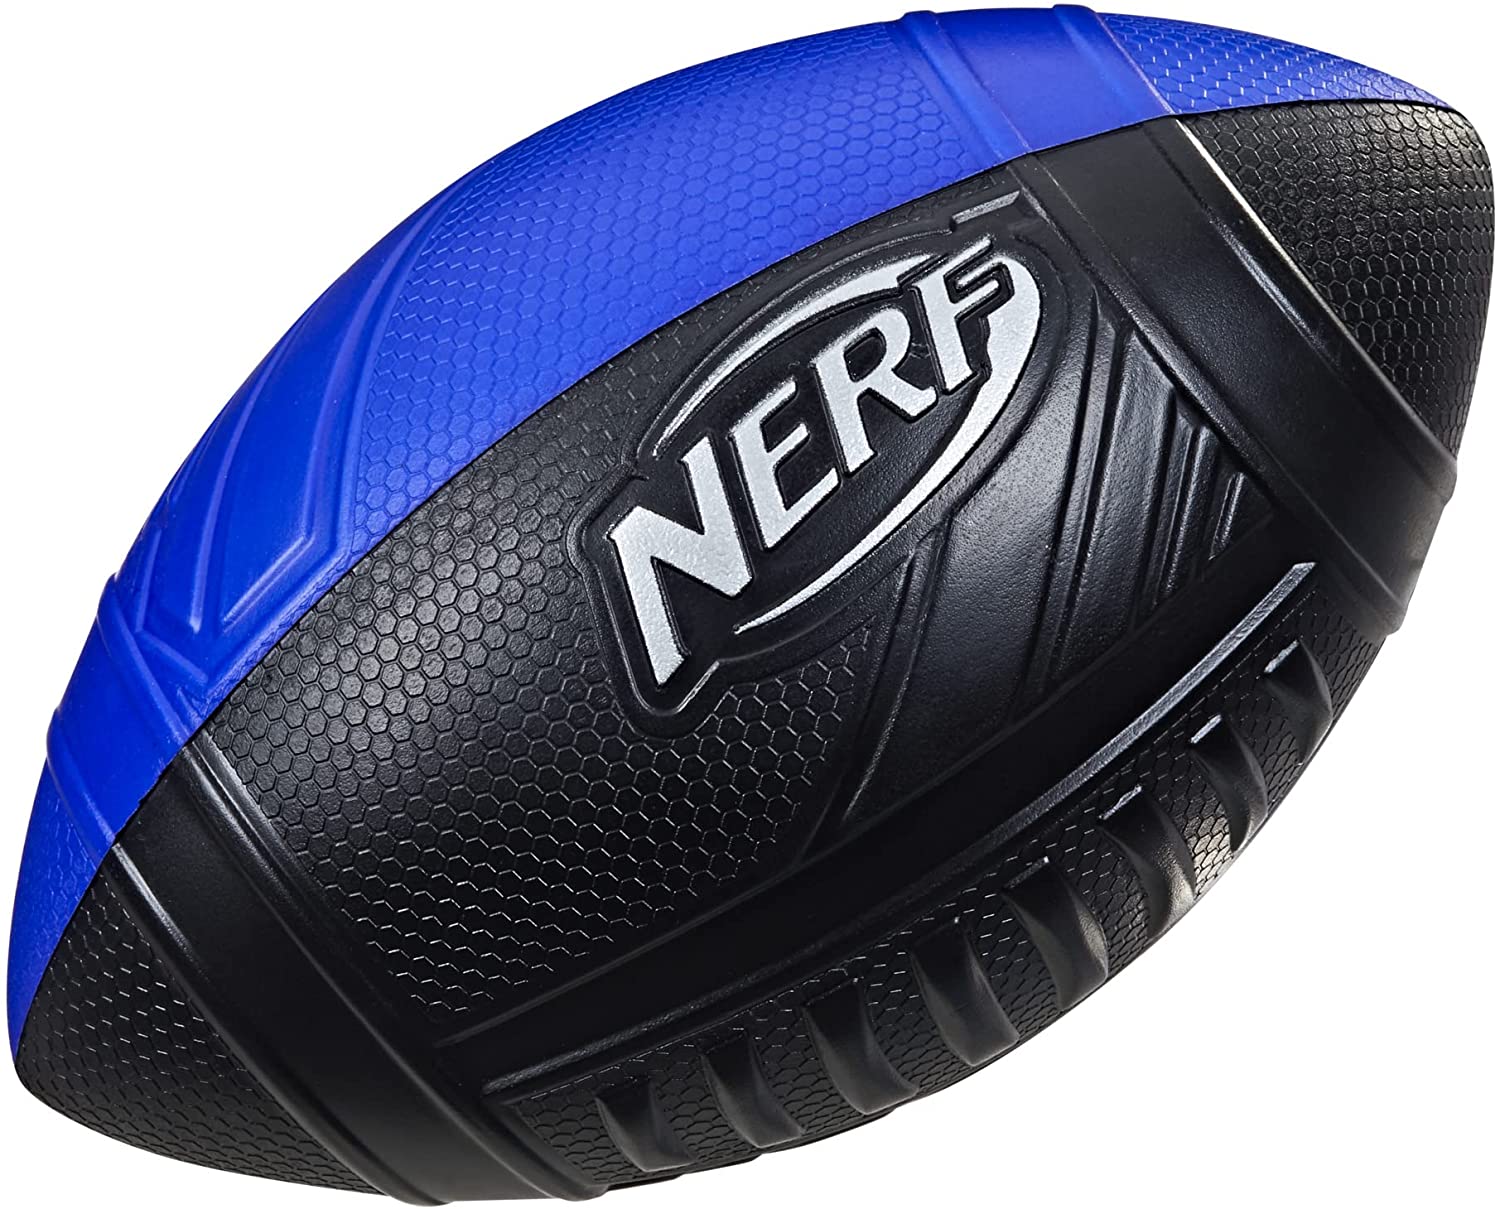 Nerf Pro Grip Classic Foam Football, Blue - Easy to Catch and Throw and Indoor Outdoor Play